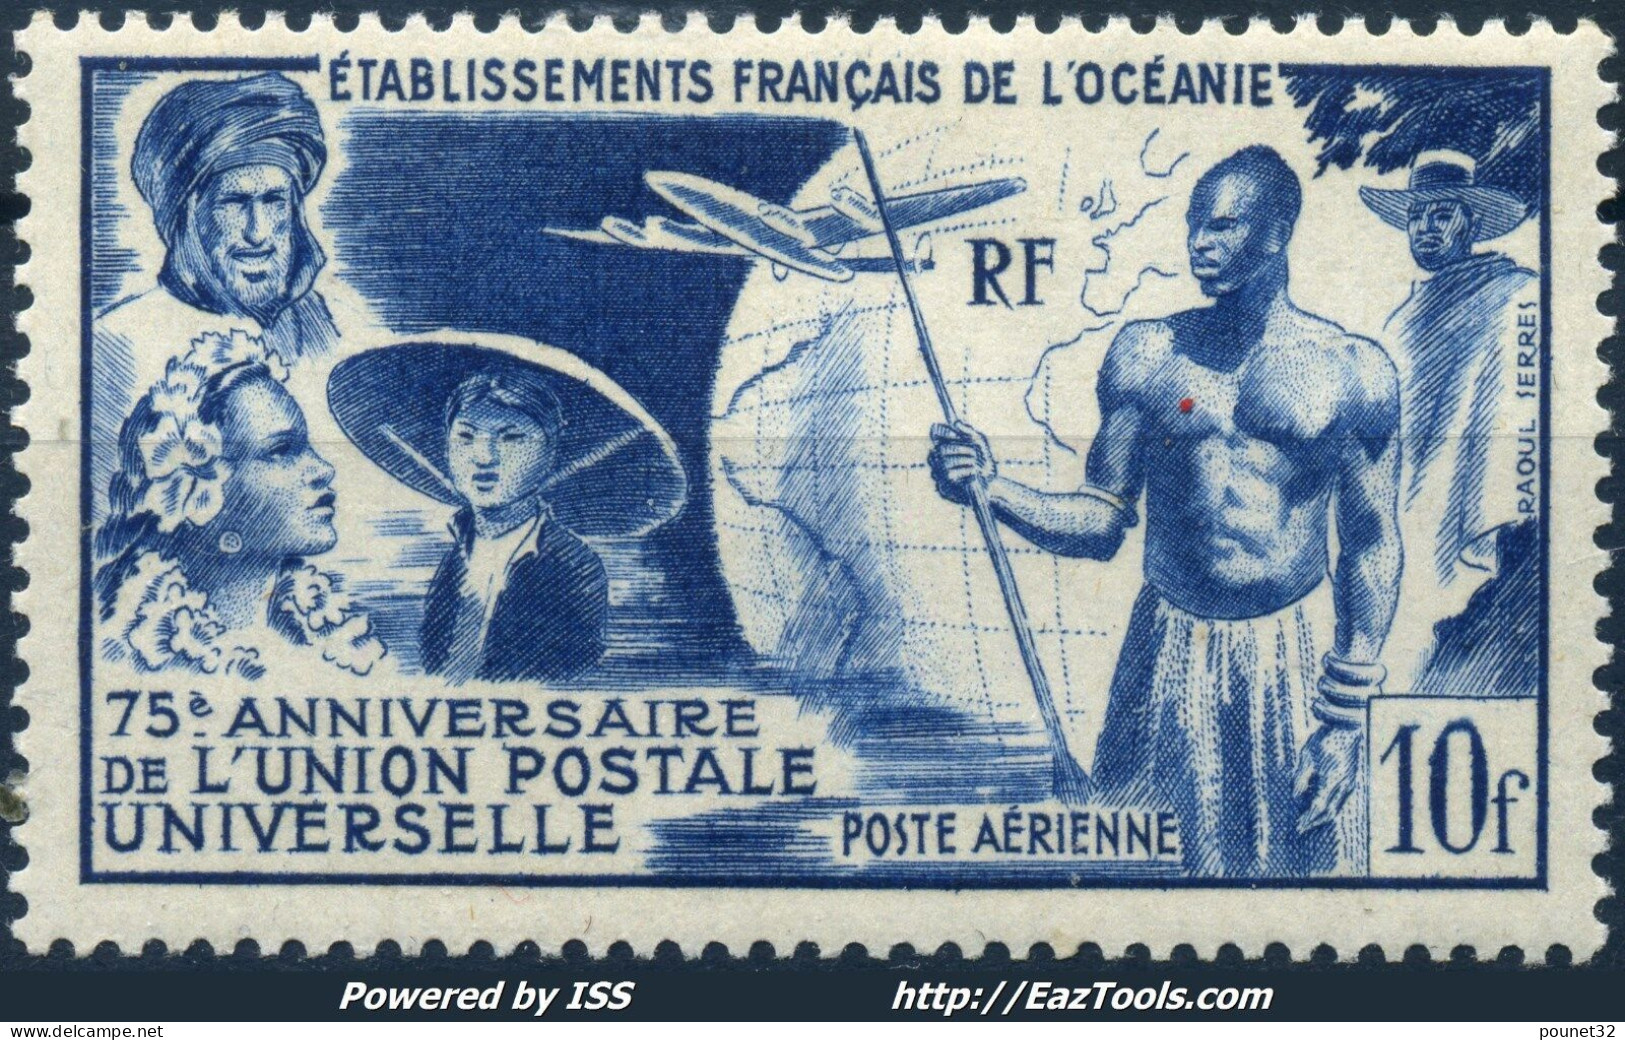 TIMBRE OCEANIE POSTE AERIENNE UPU N° 29 NEUF * GOMME AVEC CHARNIERE - Aéreo